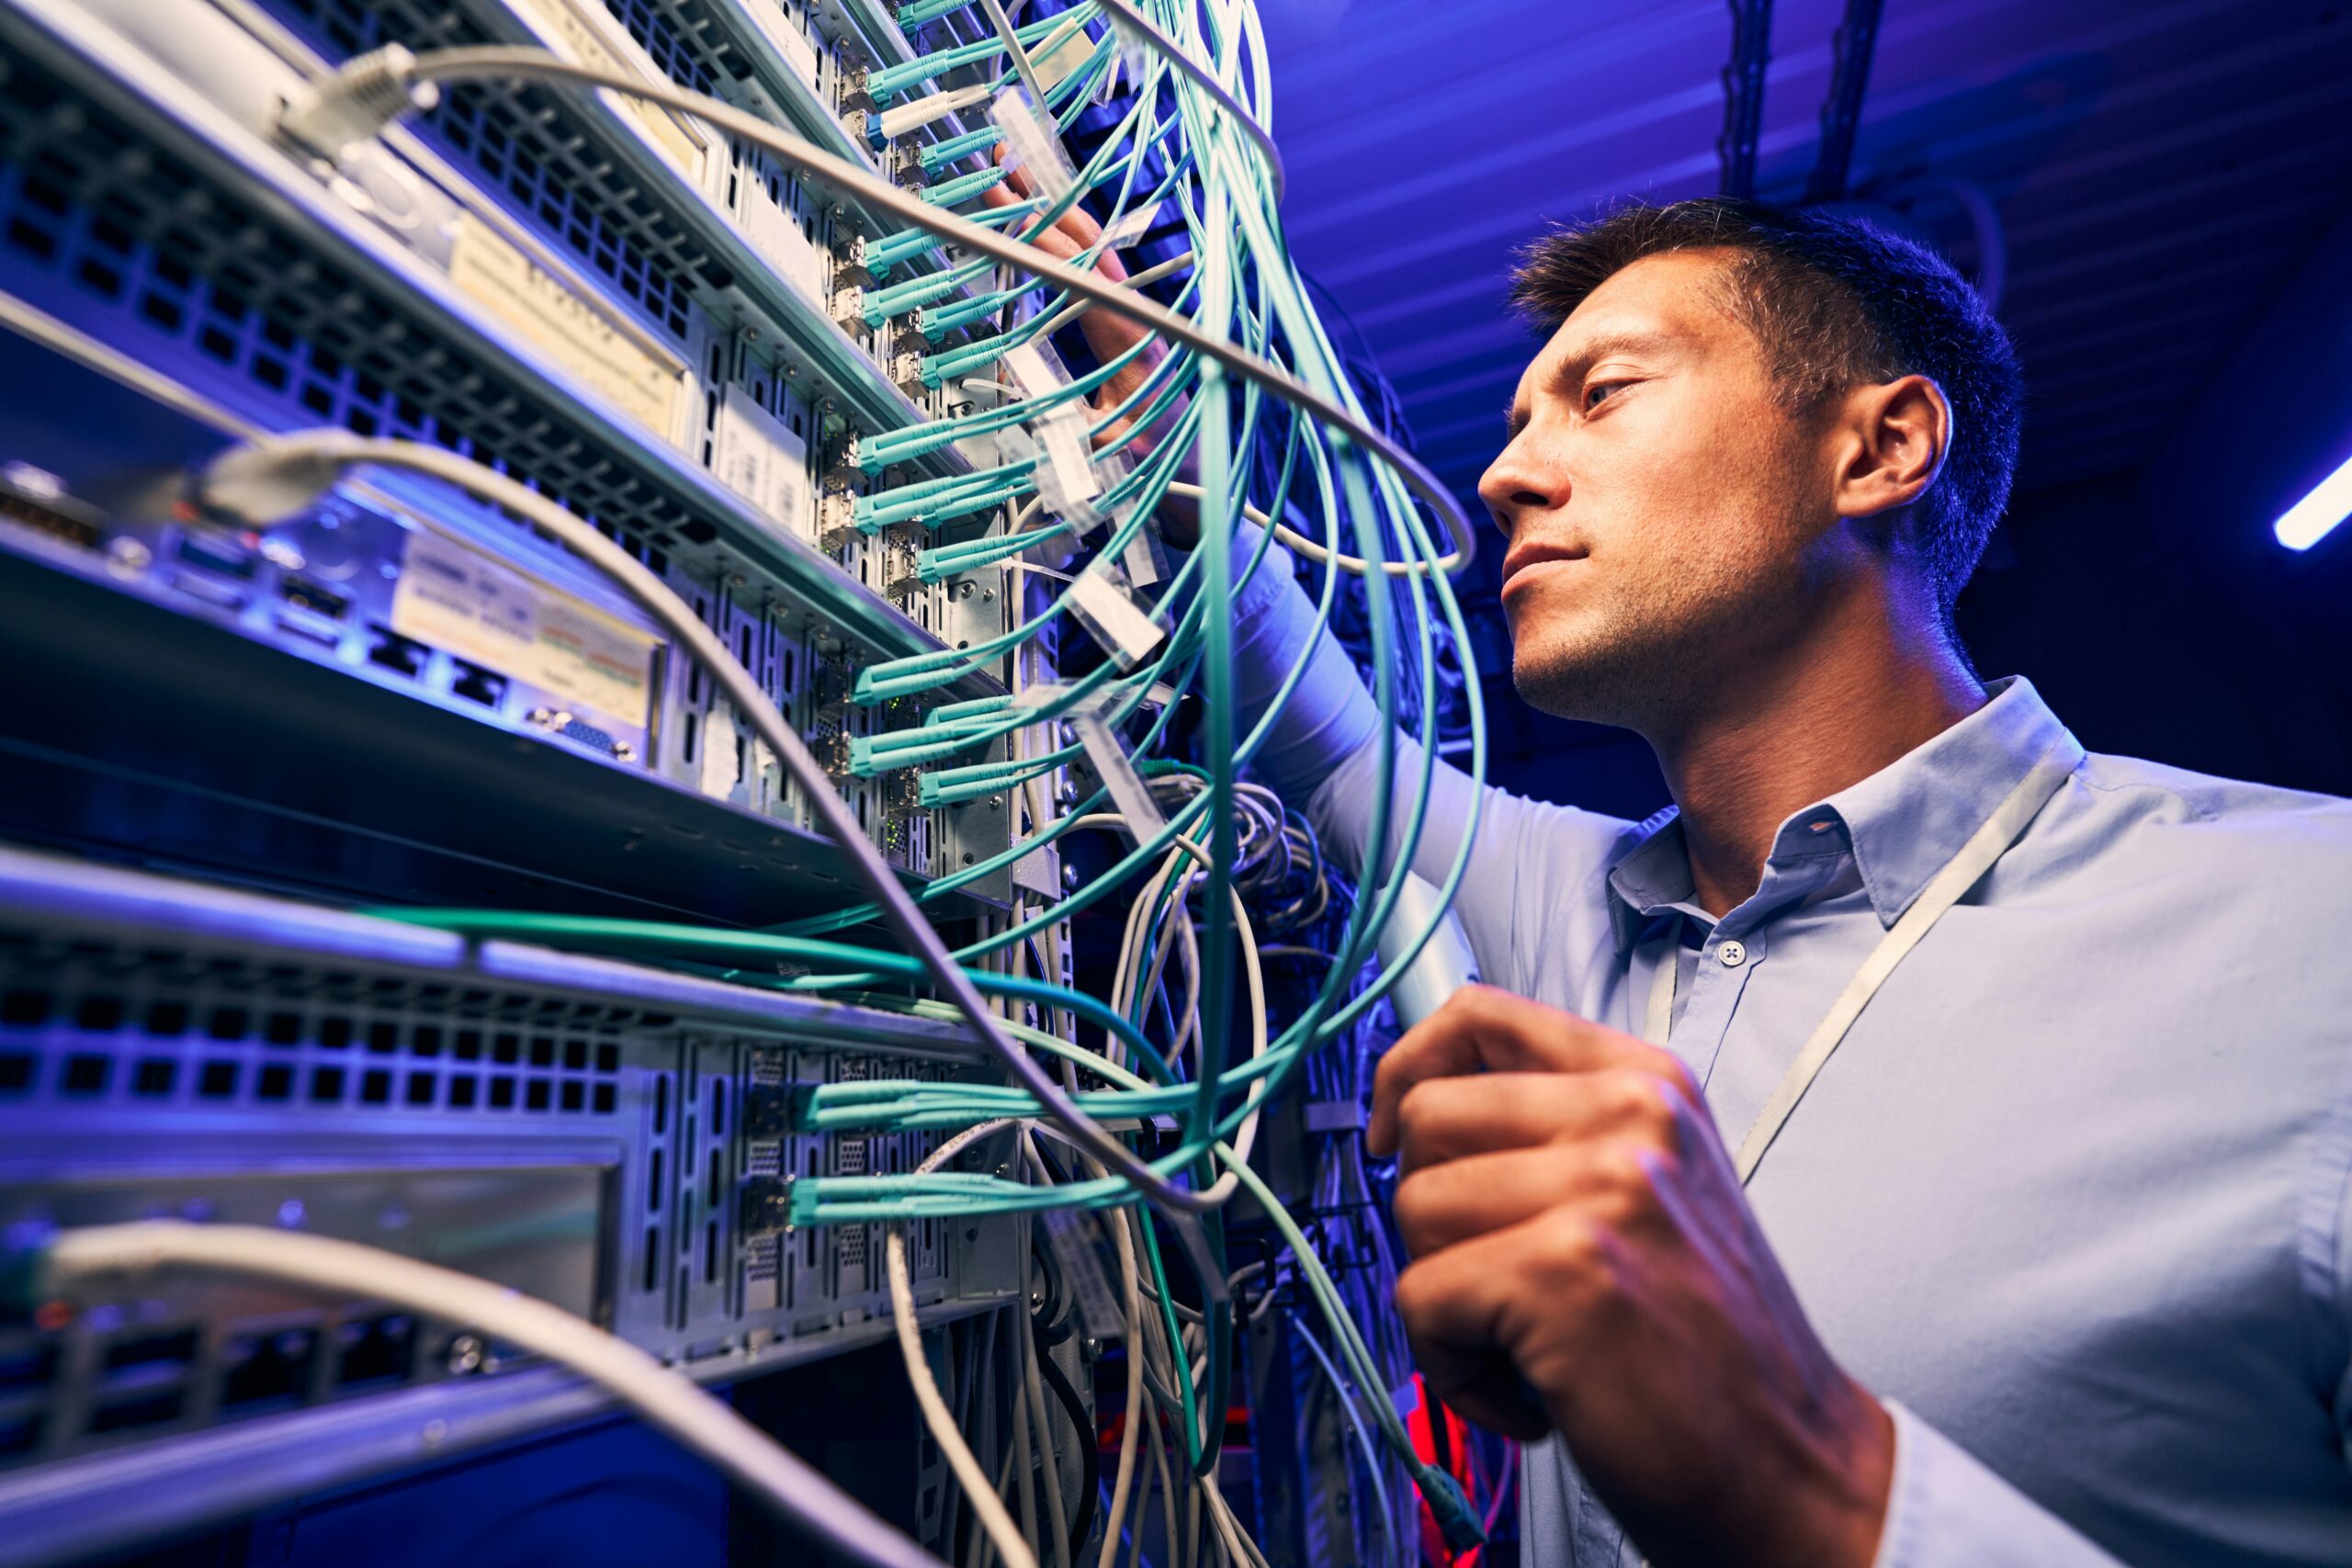 Network technician examining cables in a server room as part of managed IT support services.